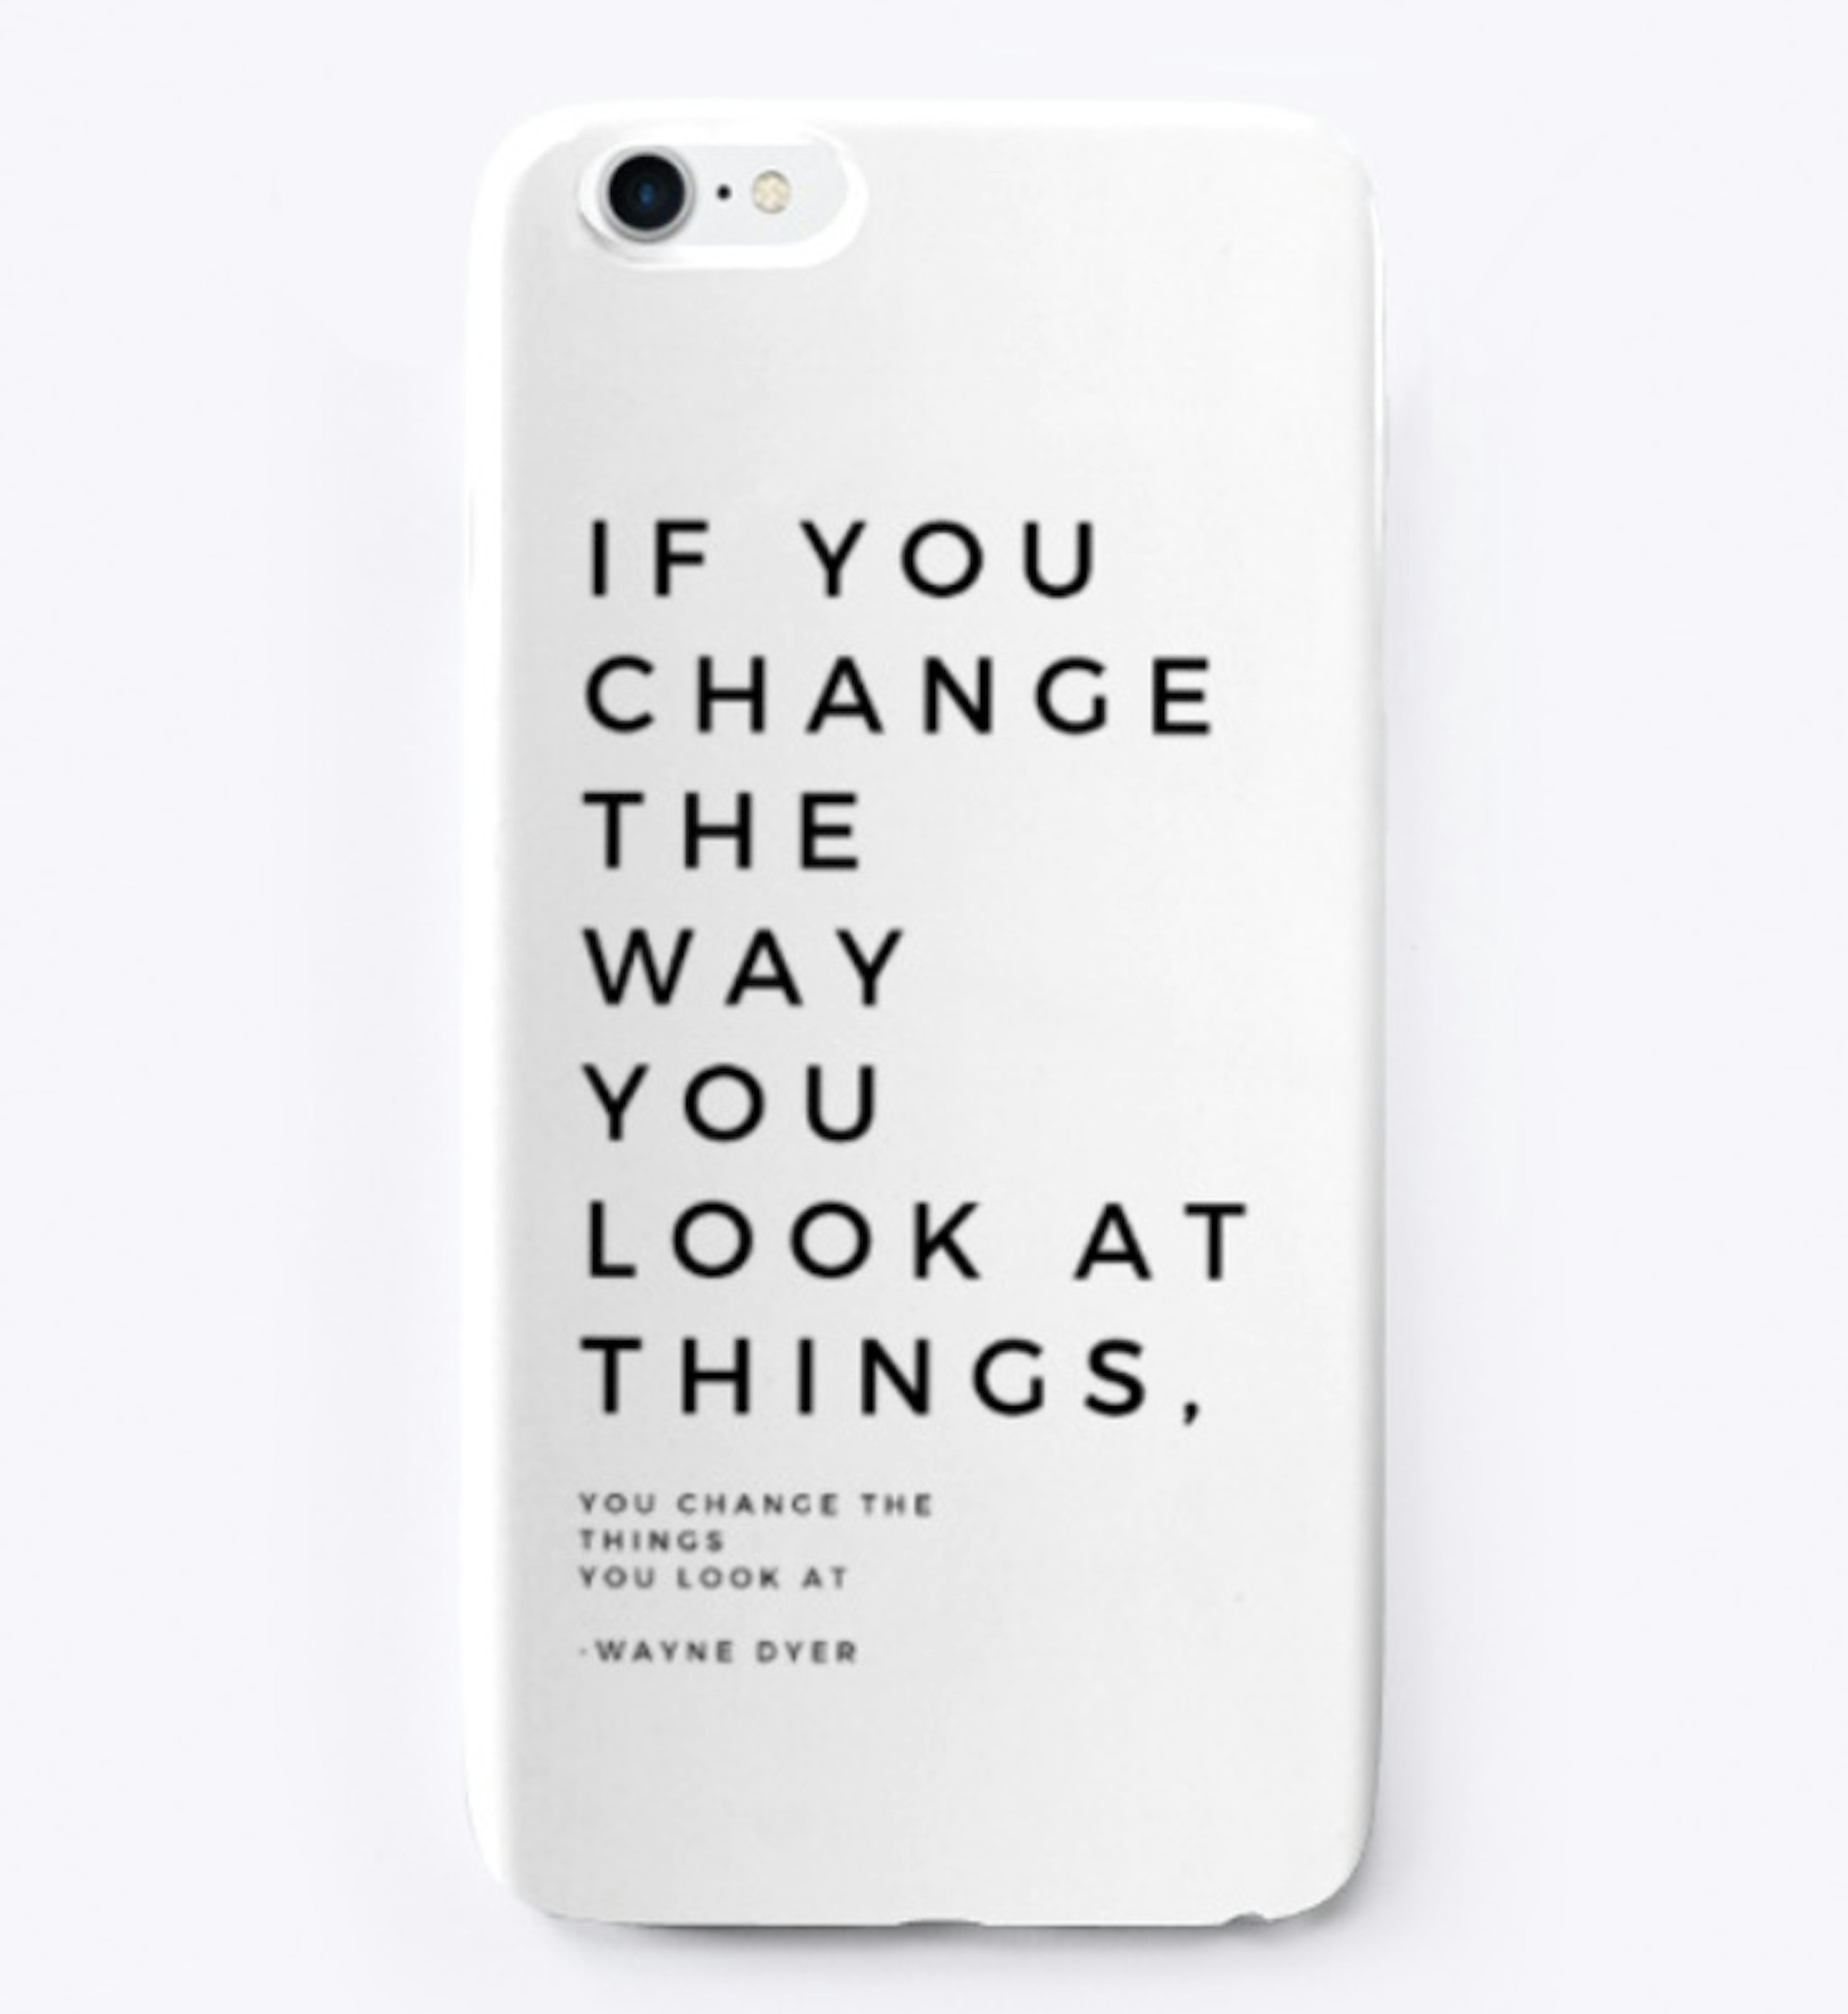 If you change the way you look at things